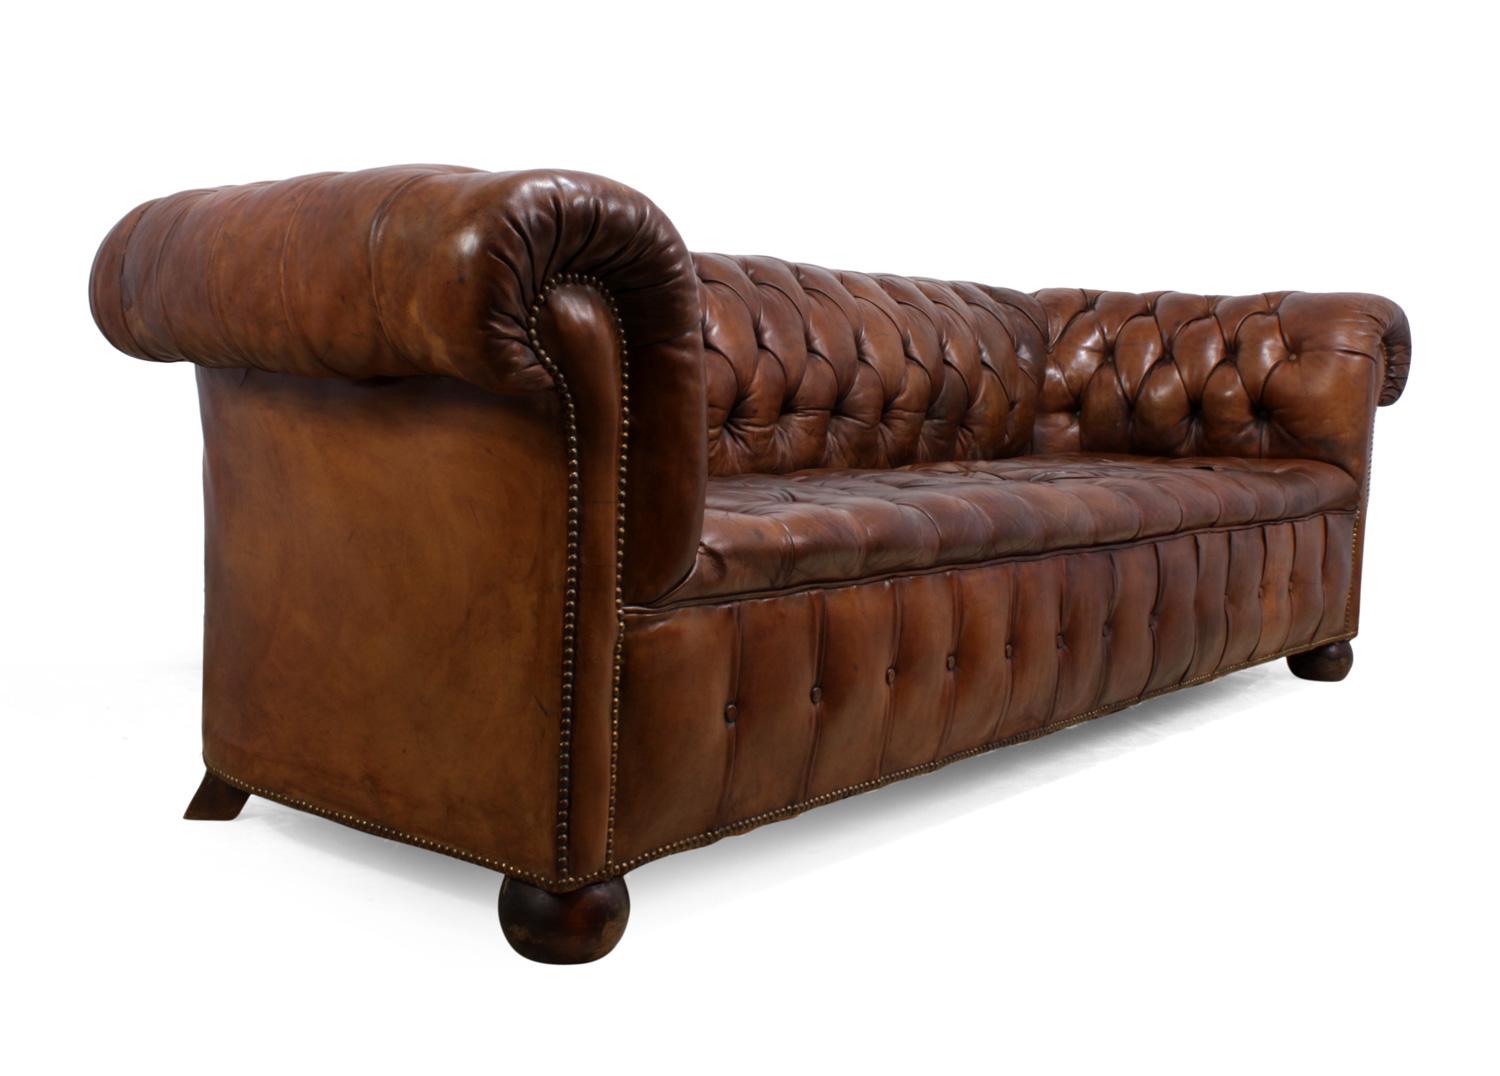 1930s English Leather Chesterfield 3